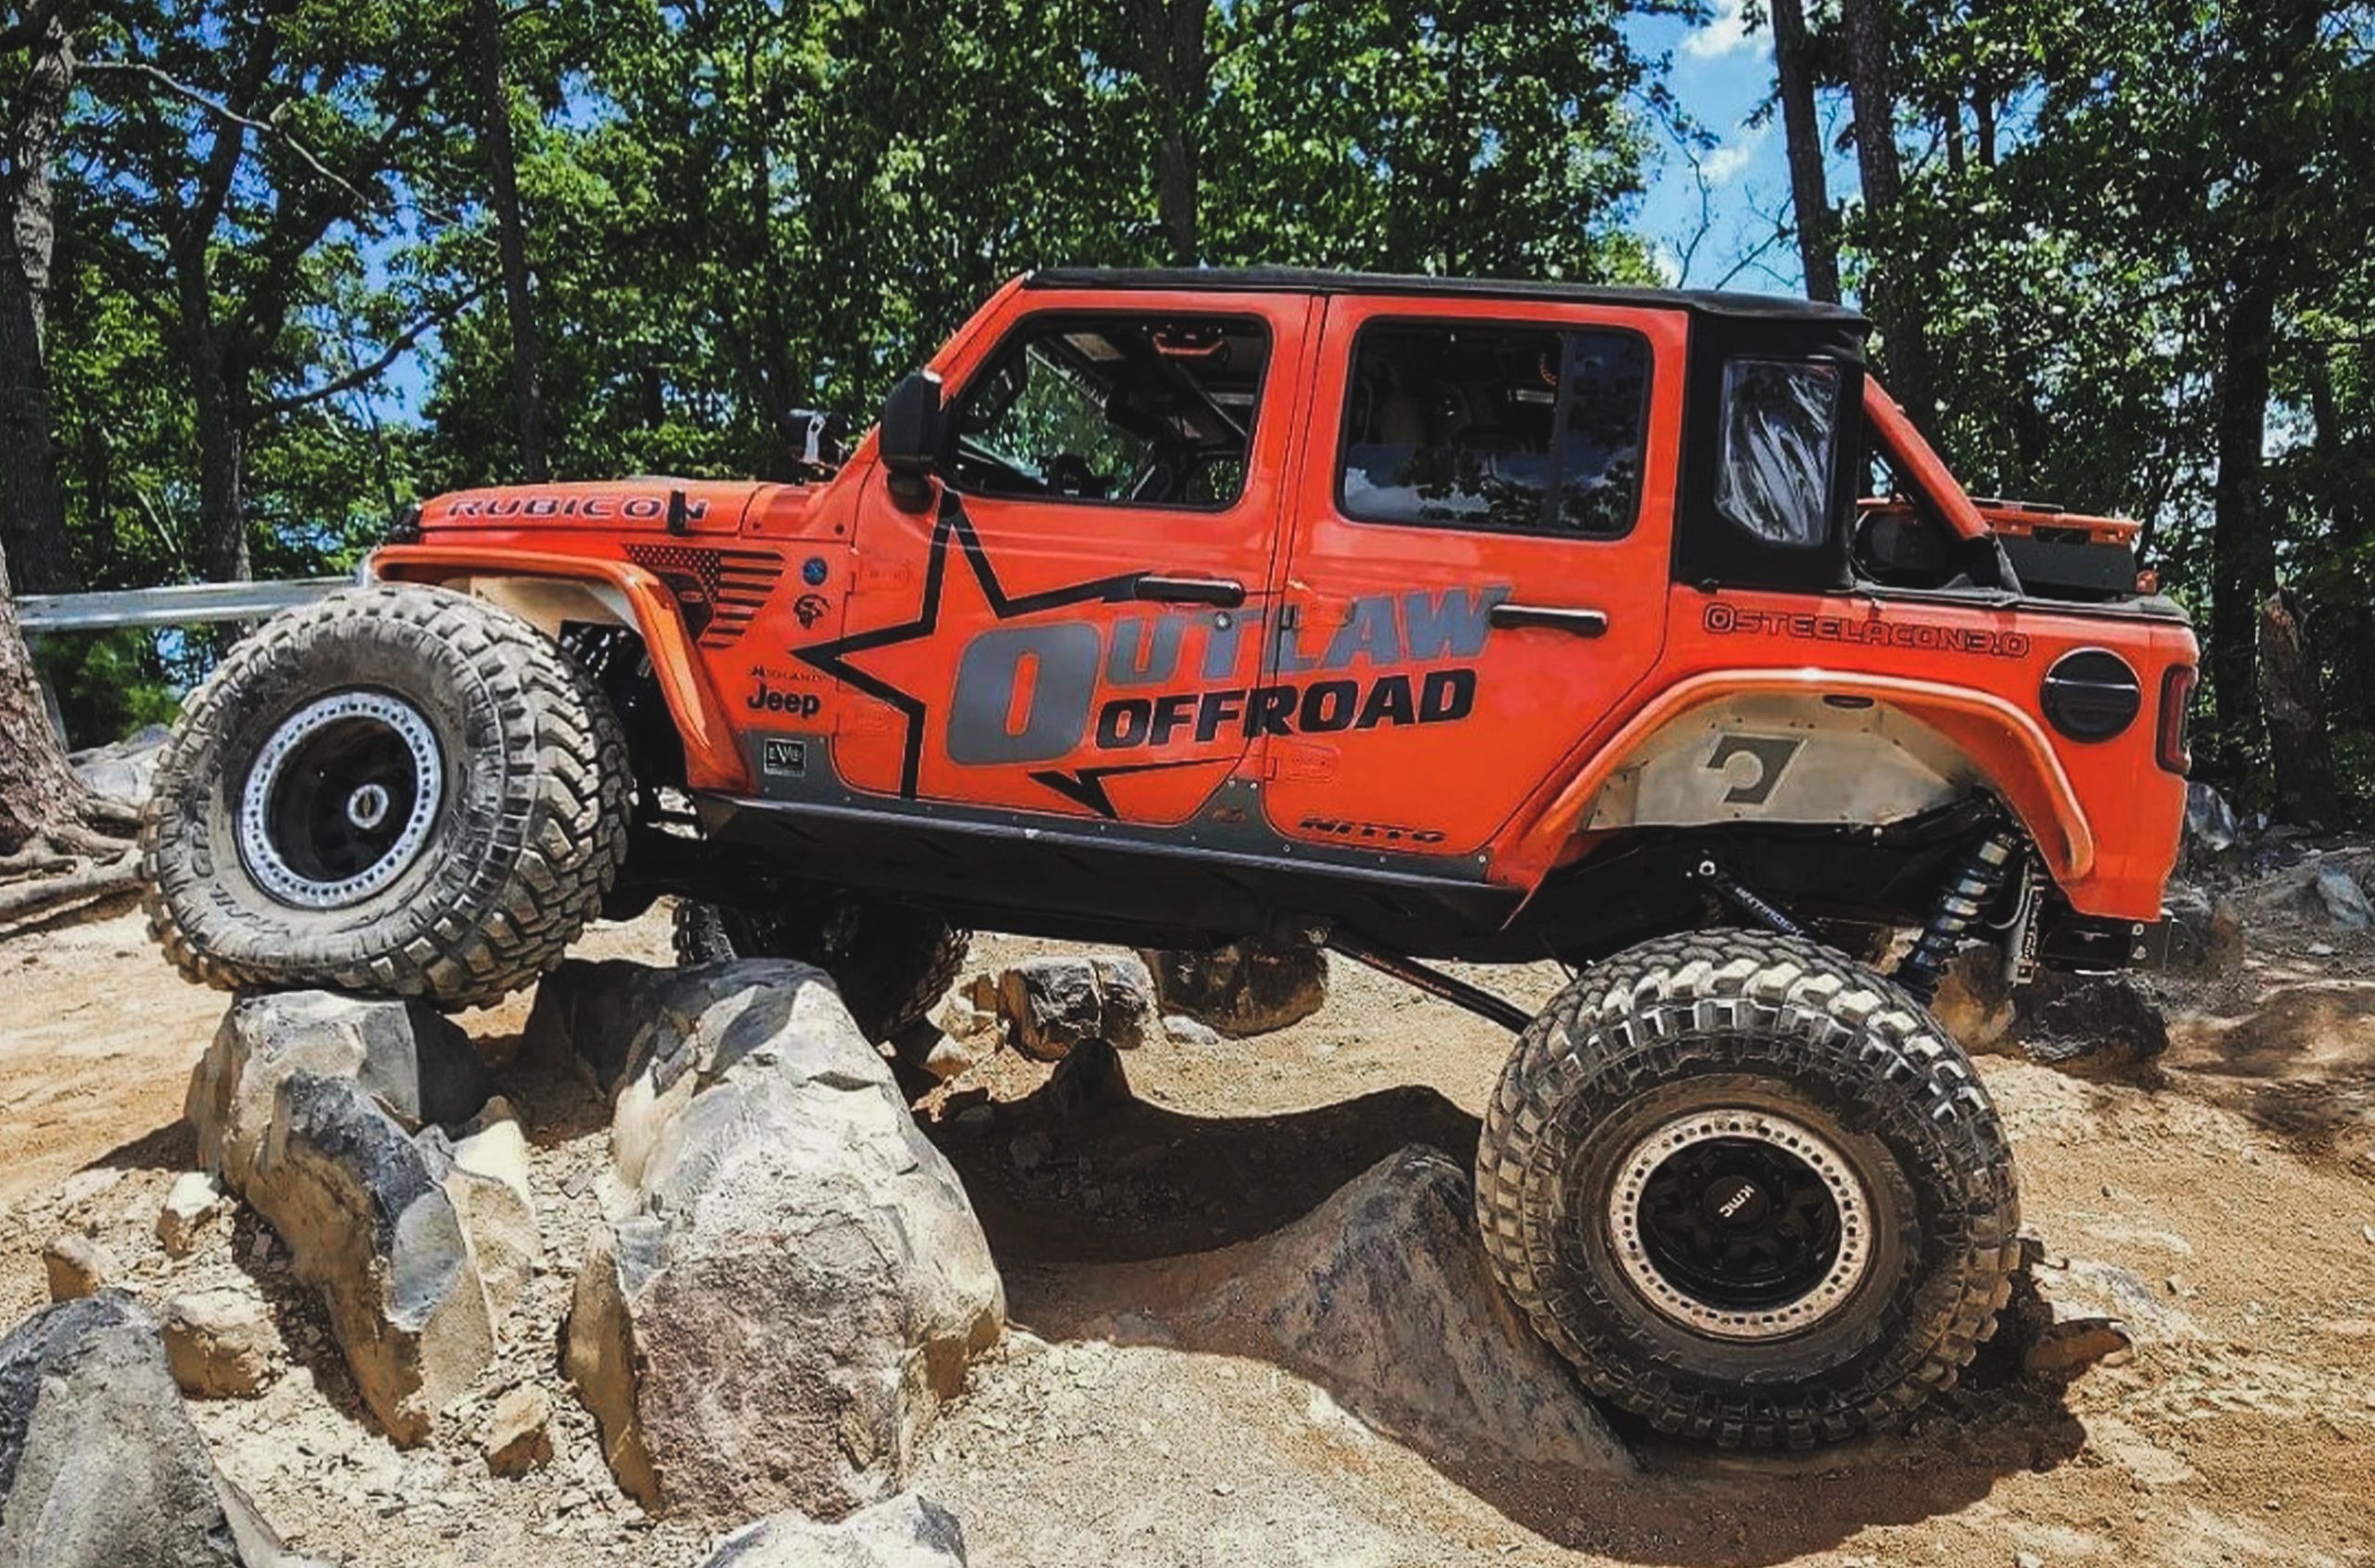 Outlaw Offroad - Charlotte - Jeep Accessories, Lift Kits